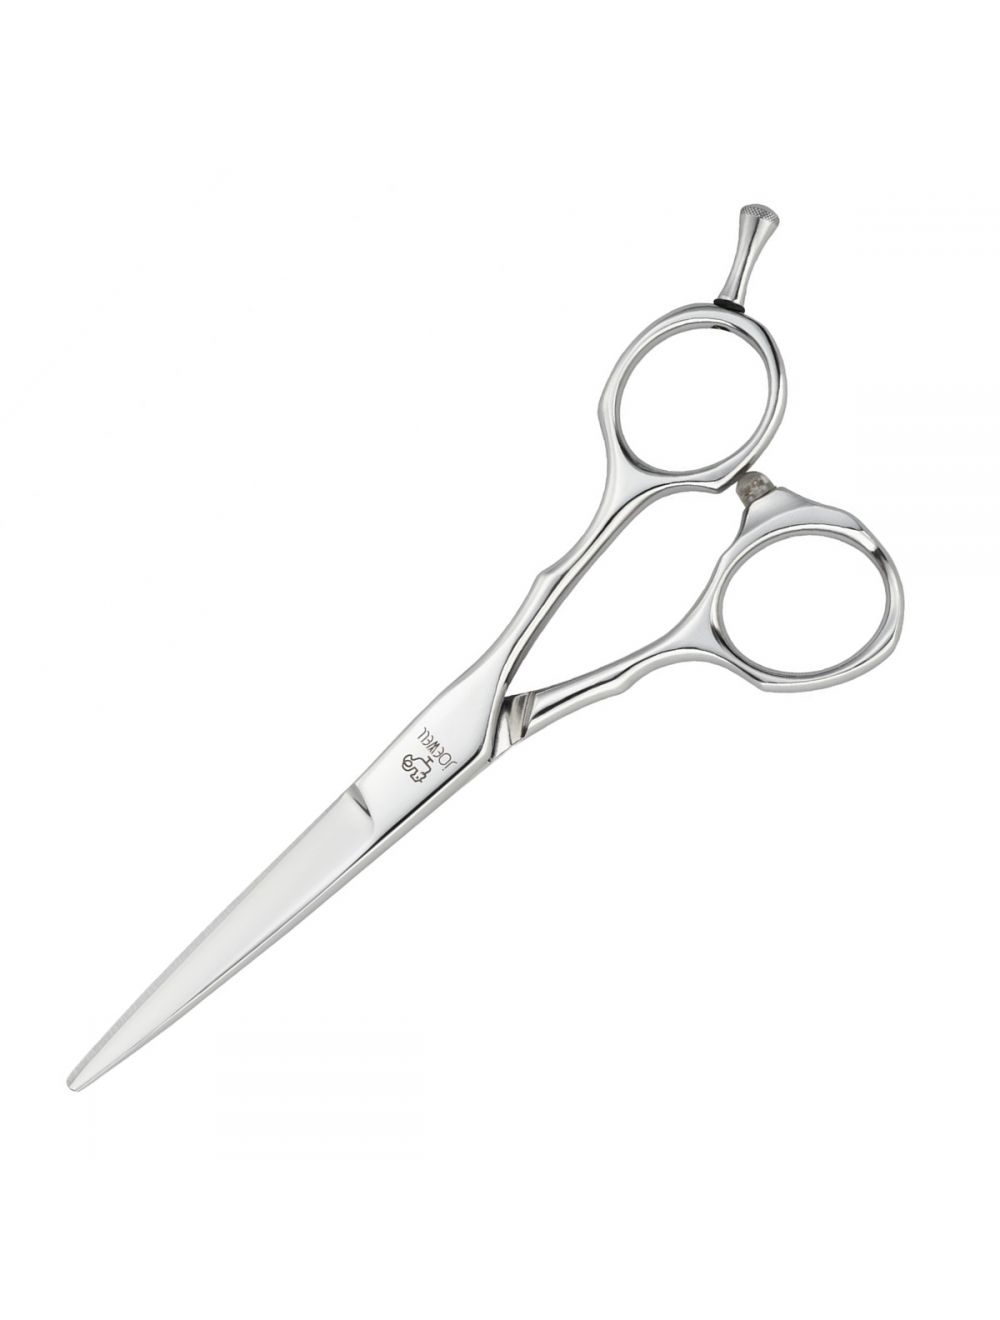 Joewell SZ Hairdressing Scissors - Ultimate Hair and Beauty